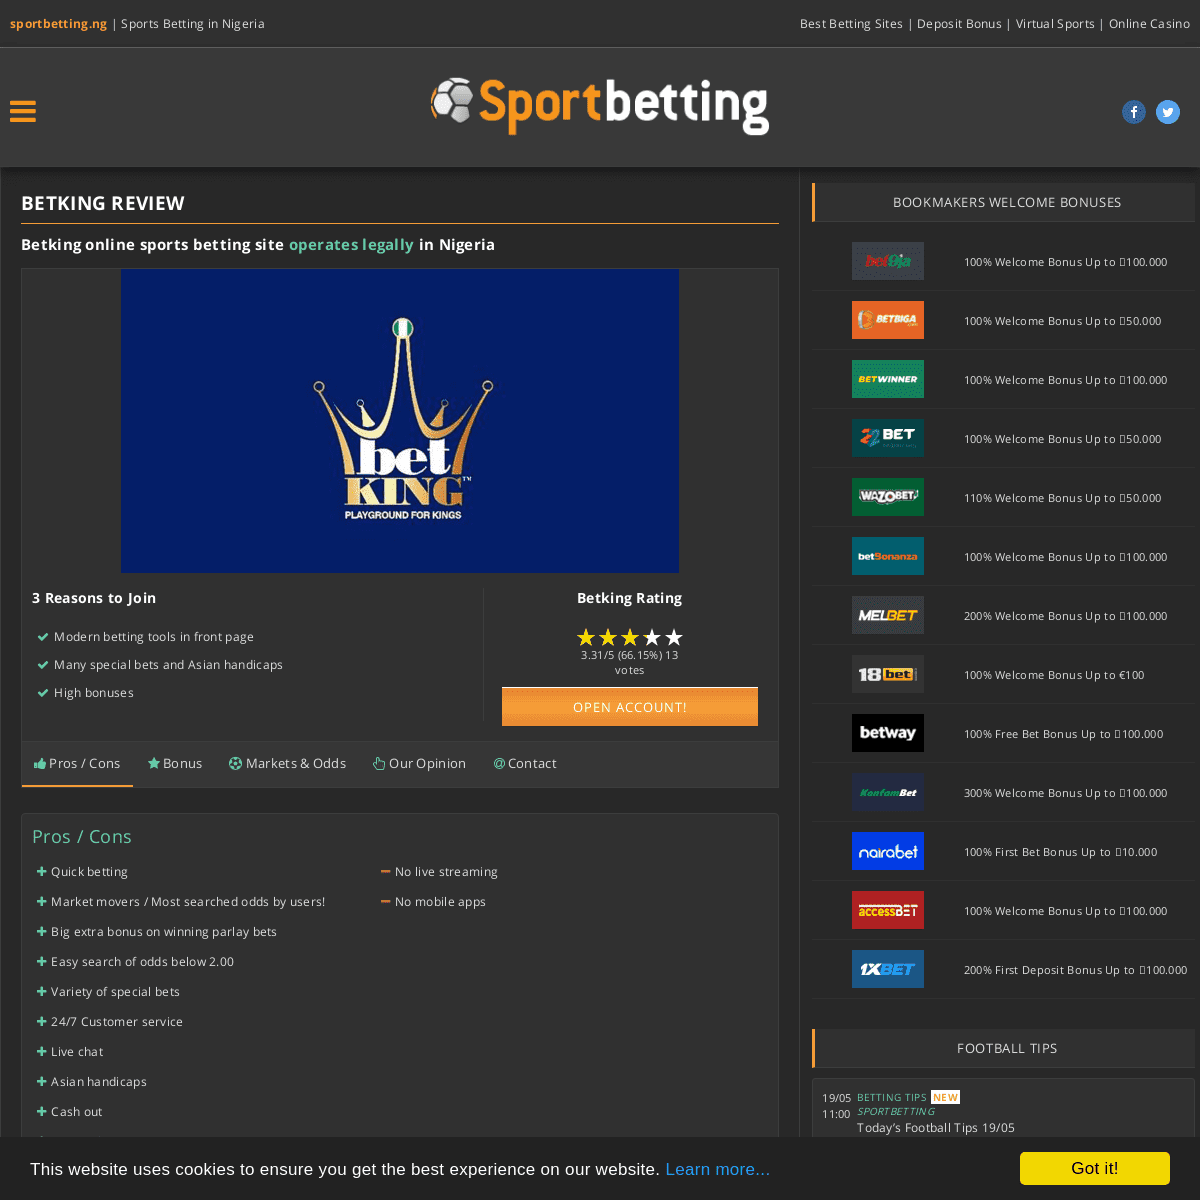 A complete backup of https://www.sportbetting.ng/betting-sites/betking/